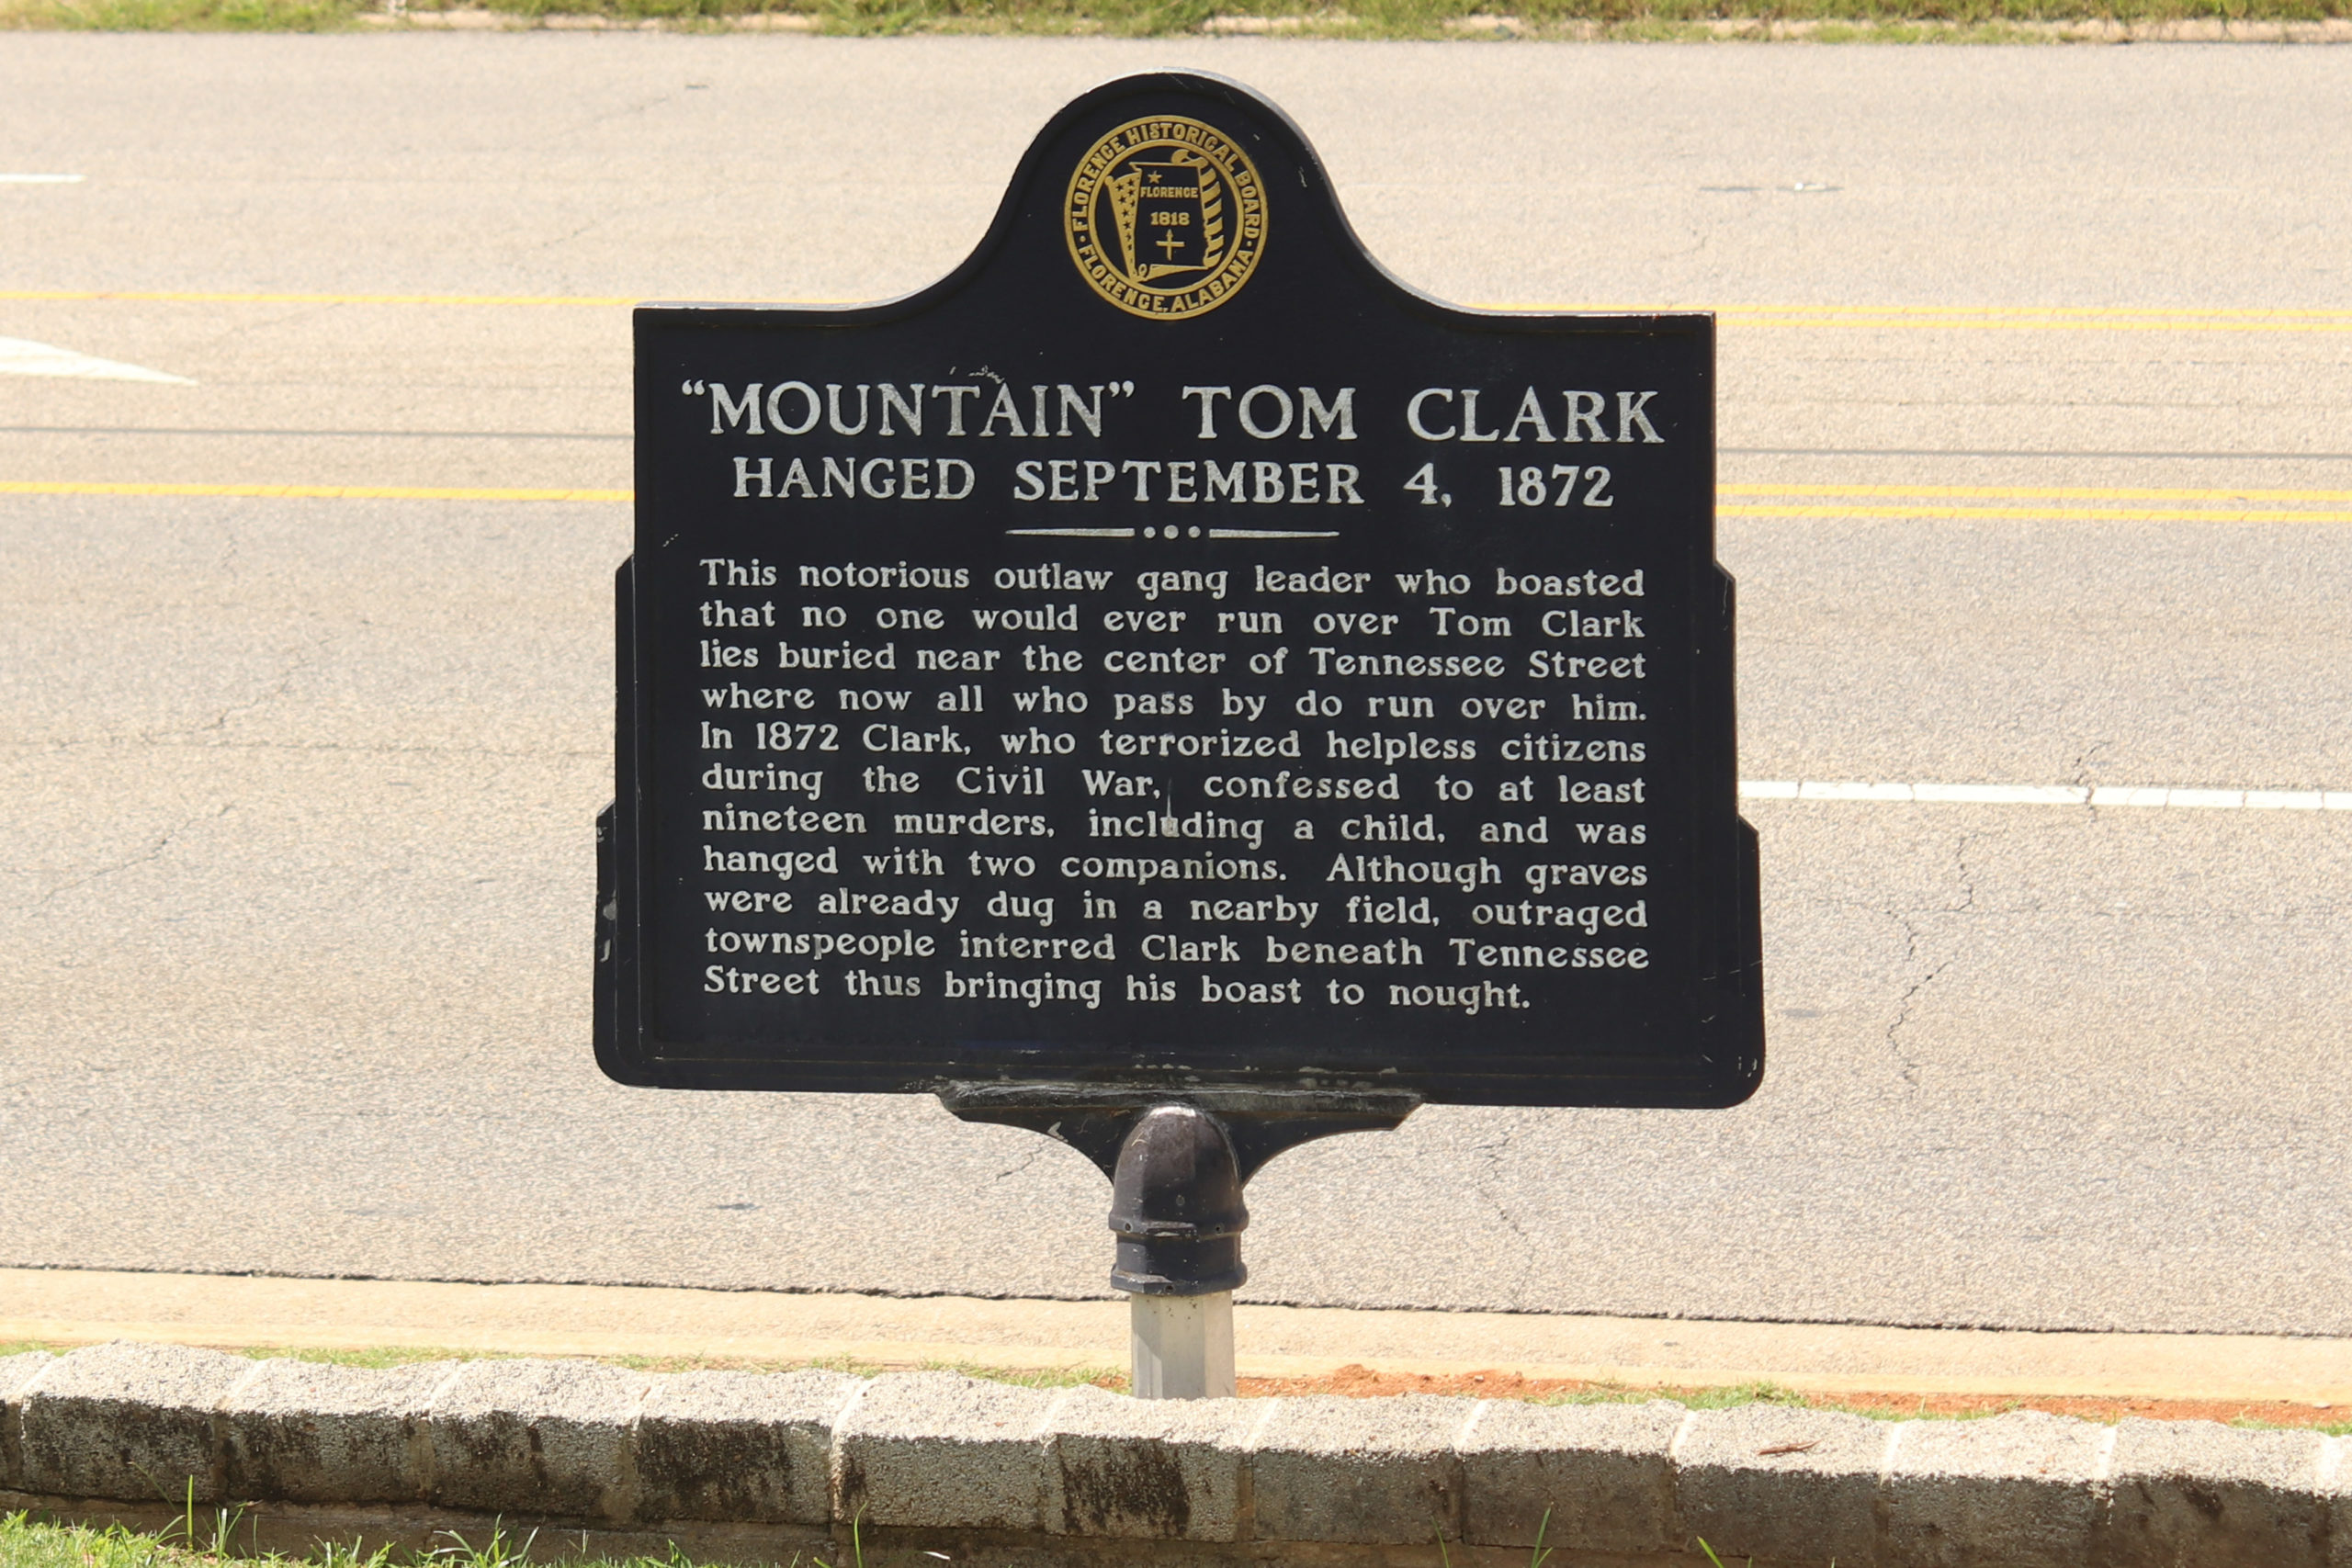 Florence City Cemetery - YOU WON'T RUN OVER TOM CLARK!